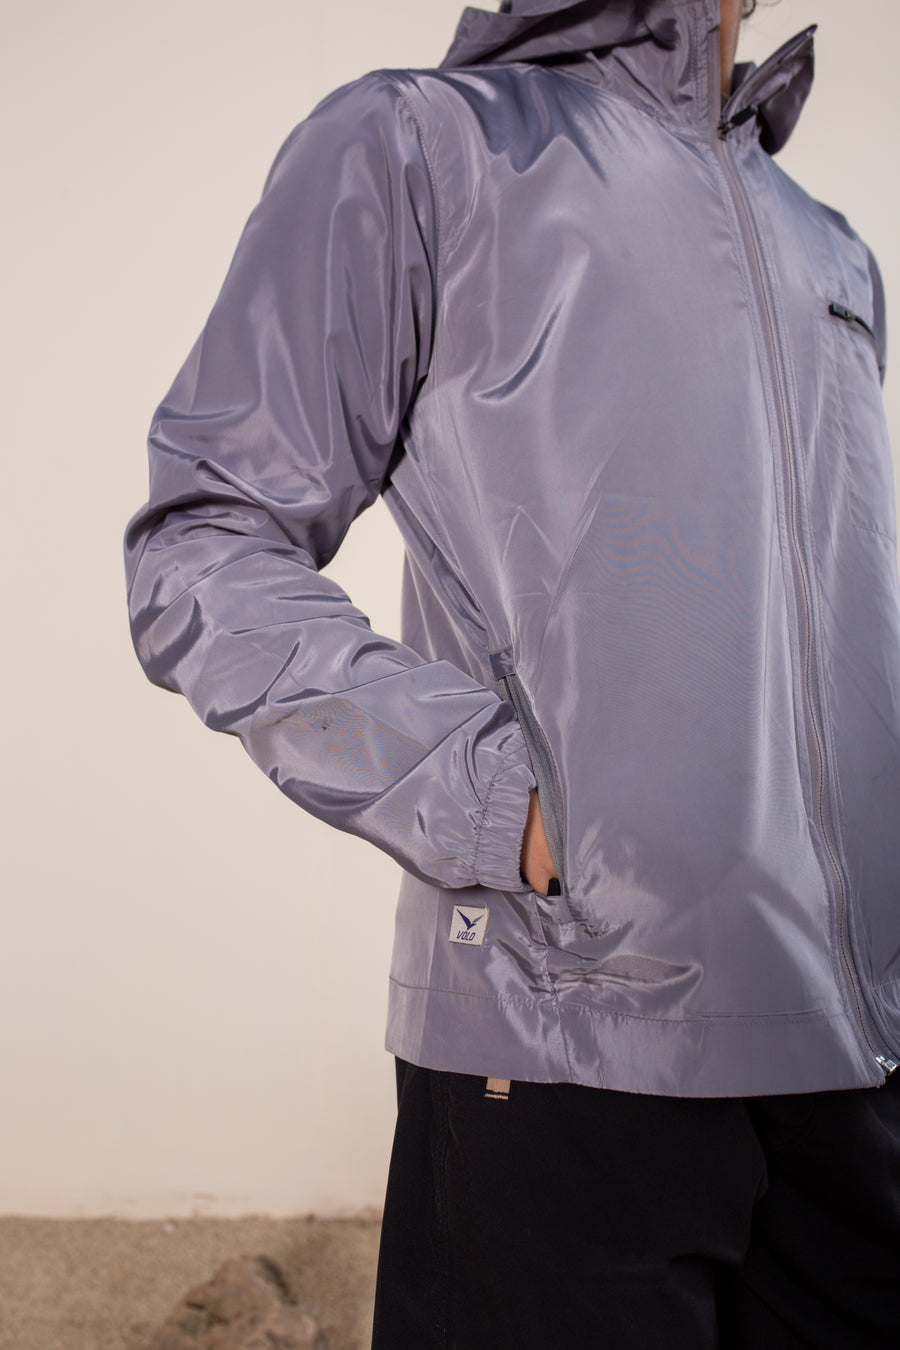 Women's Windansea Jacket in Silver Gray | VOLO Apparel | The ultimate all year jacket, an ultralight hooded windbreaker, crafted with the revolutionary memory fabric and five pockets. This jacket is full of features, water repellant, three zipper pockets, UPF 50 protection from the sun and tailored fit to look super stylish while being ready for any adventure.